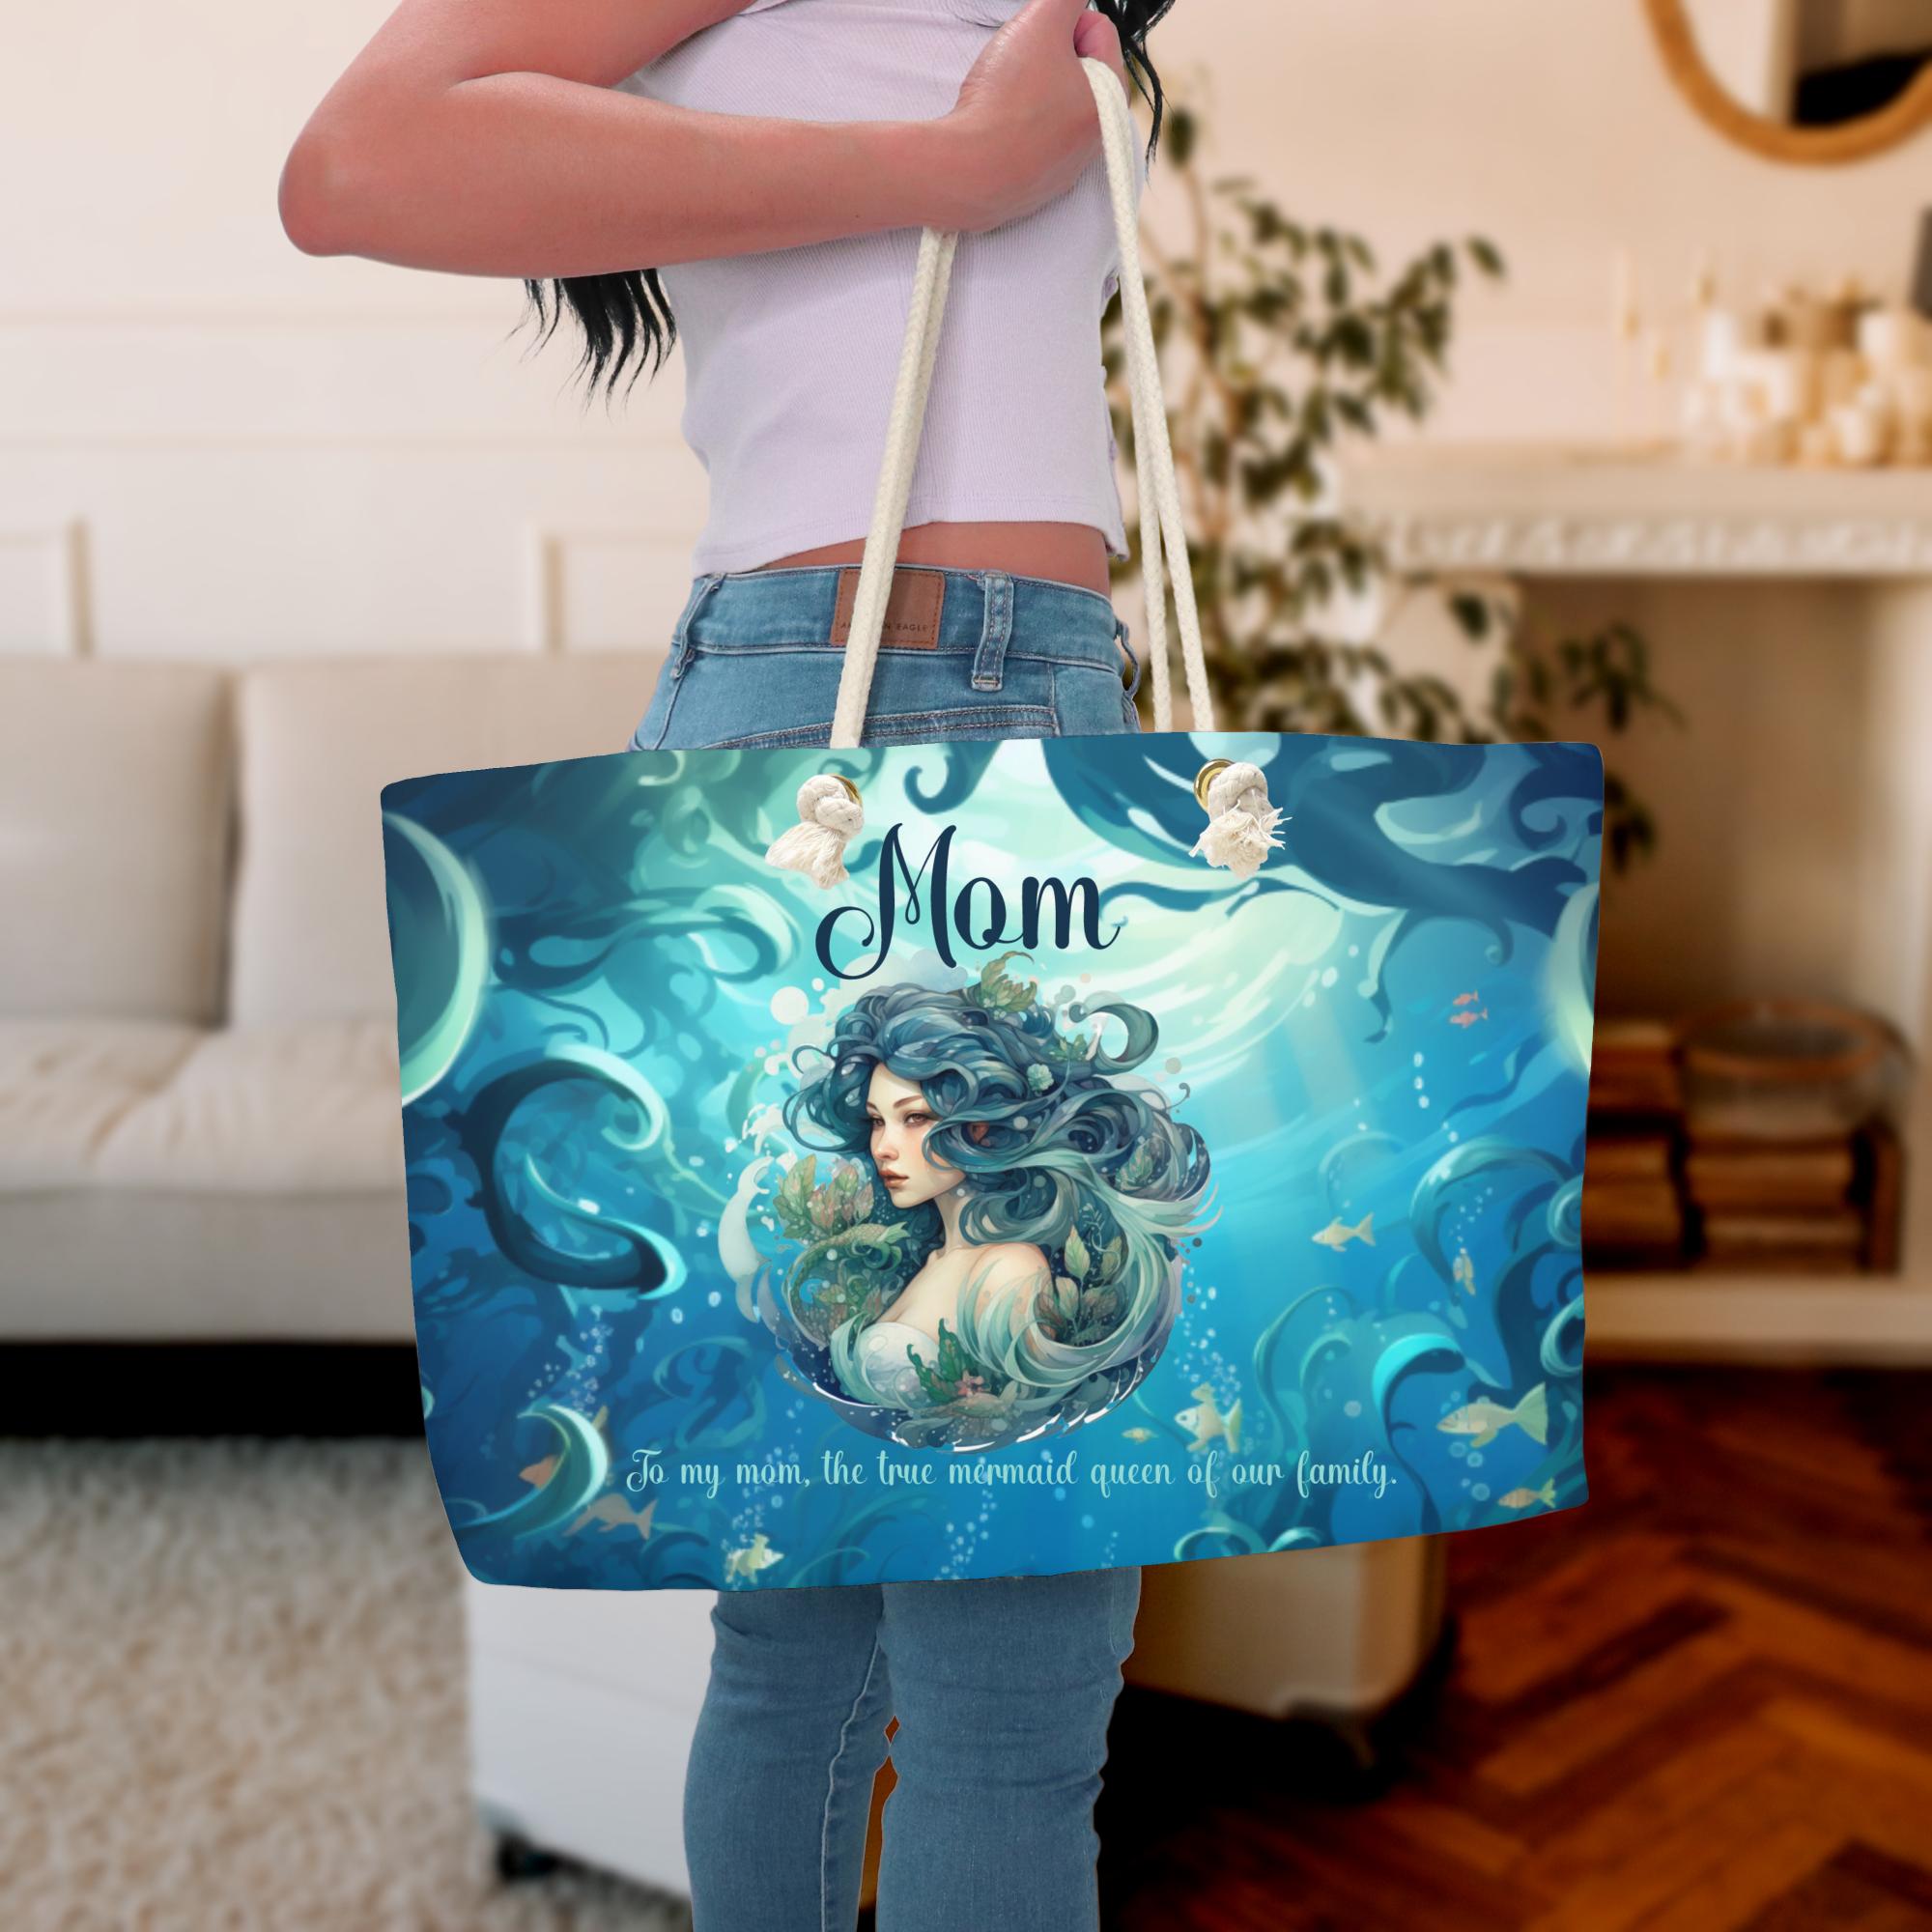 Beach Bag For Mom Mermaid Weekender Travel Tote Carry On Gift For Mother